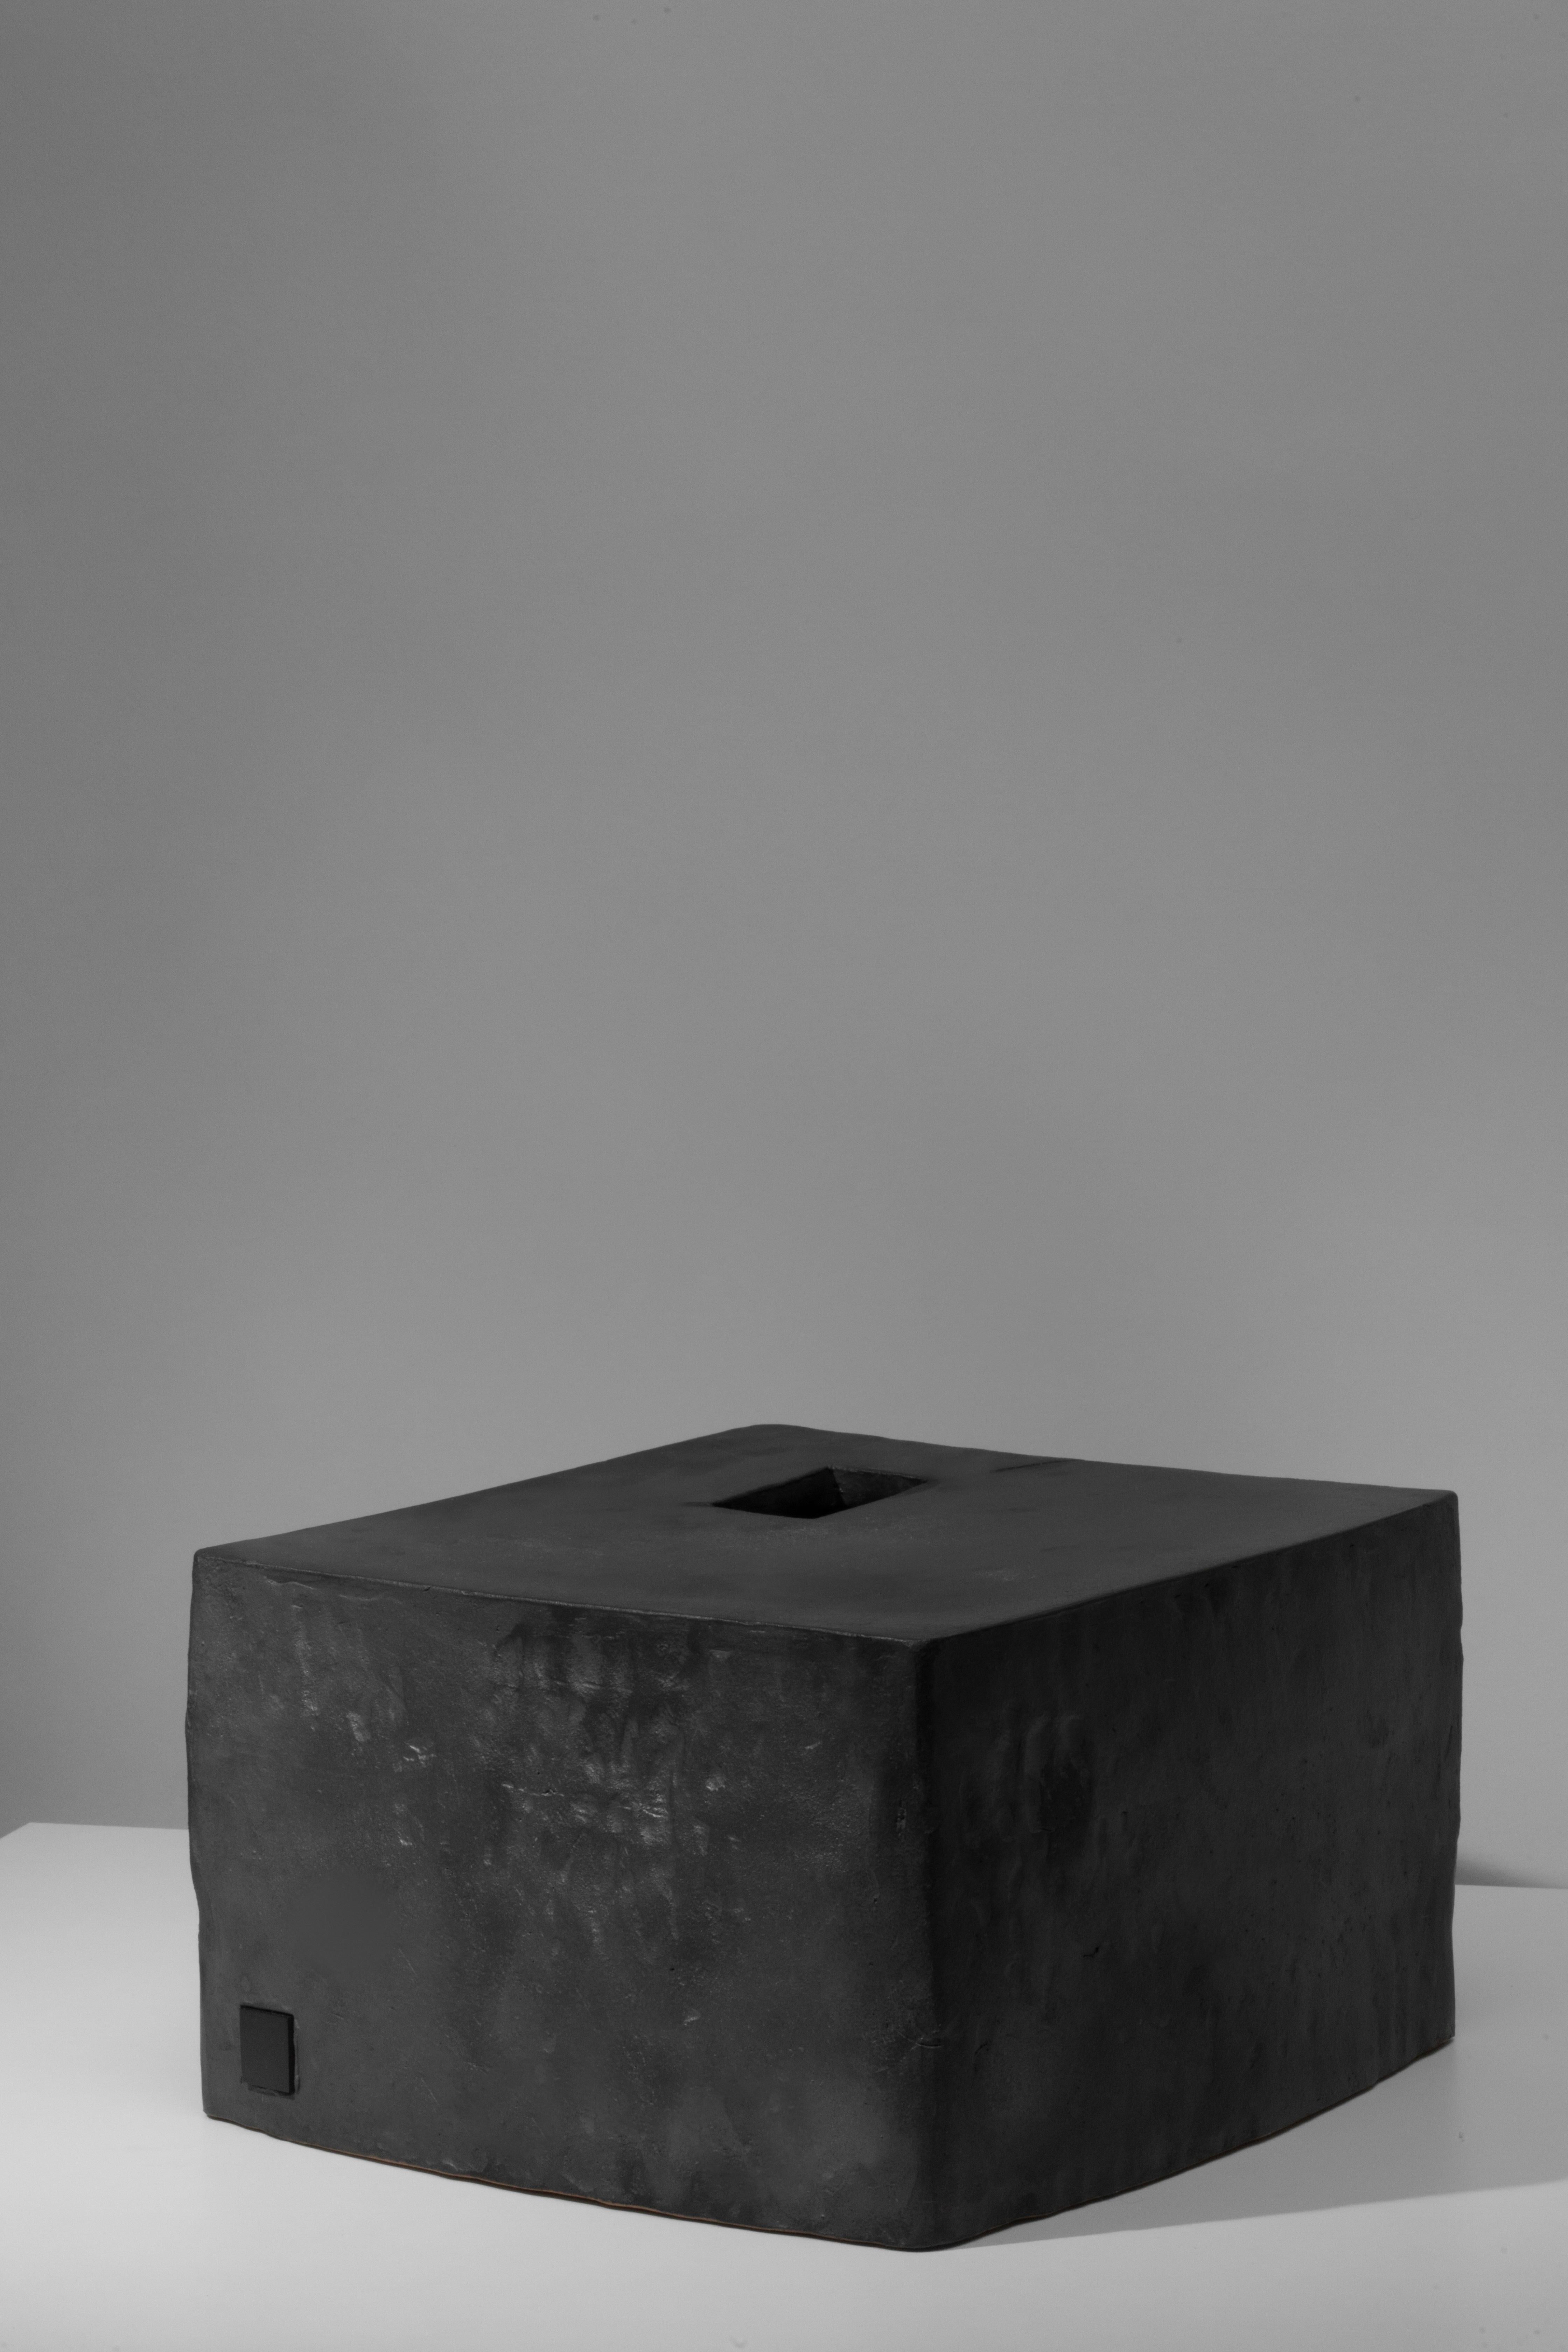 Coil-built ceramic low table with black coppered glaze. Marked with an engraved bronze label to underside: Jonathan Nesci w/ Robert Pulley 18/12. 

Designed by Jonathan Nesci and made in Columbus, Indiana by local ceramist Robert Pulley for